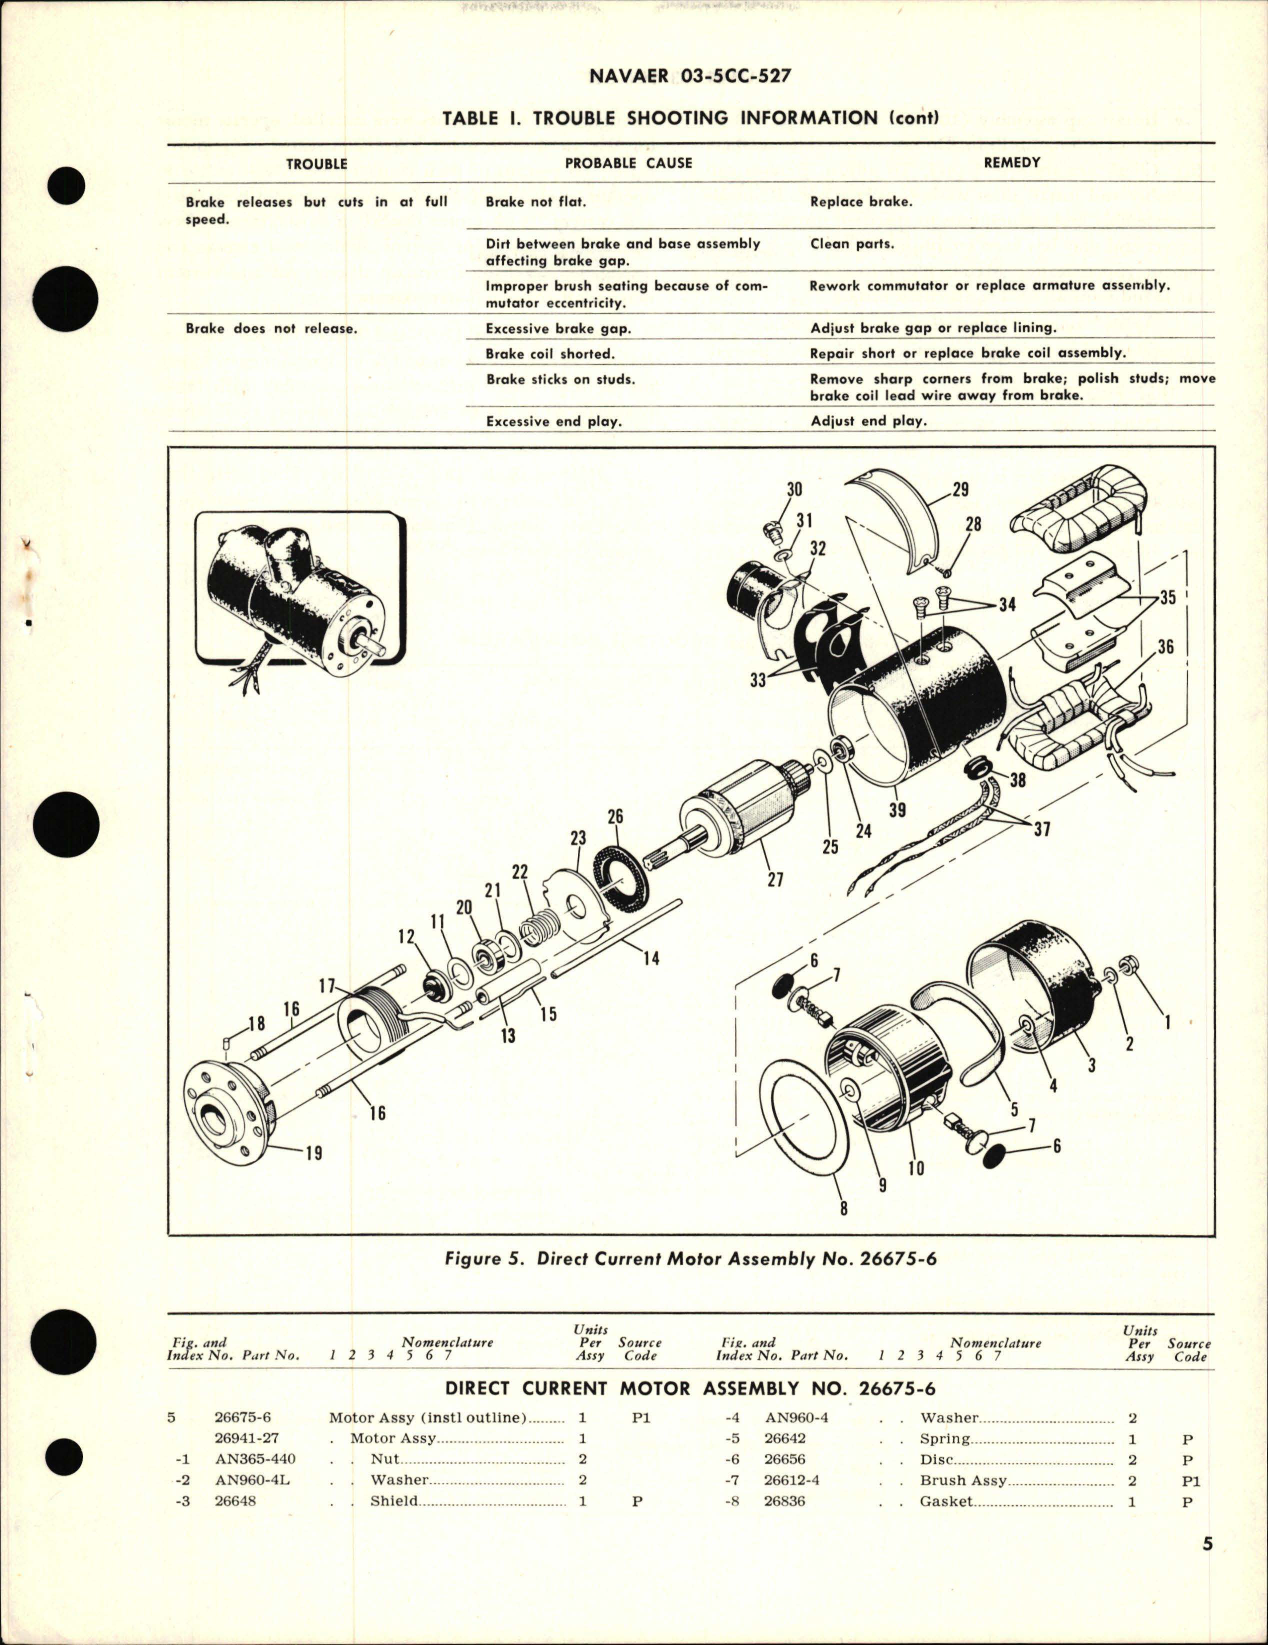 Sample page 5 from AirCorps Library document: Overhaul Instructions with Parts Breakdown for Motor Assembly, Direct Current - Part 26675-6